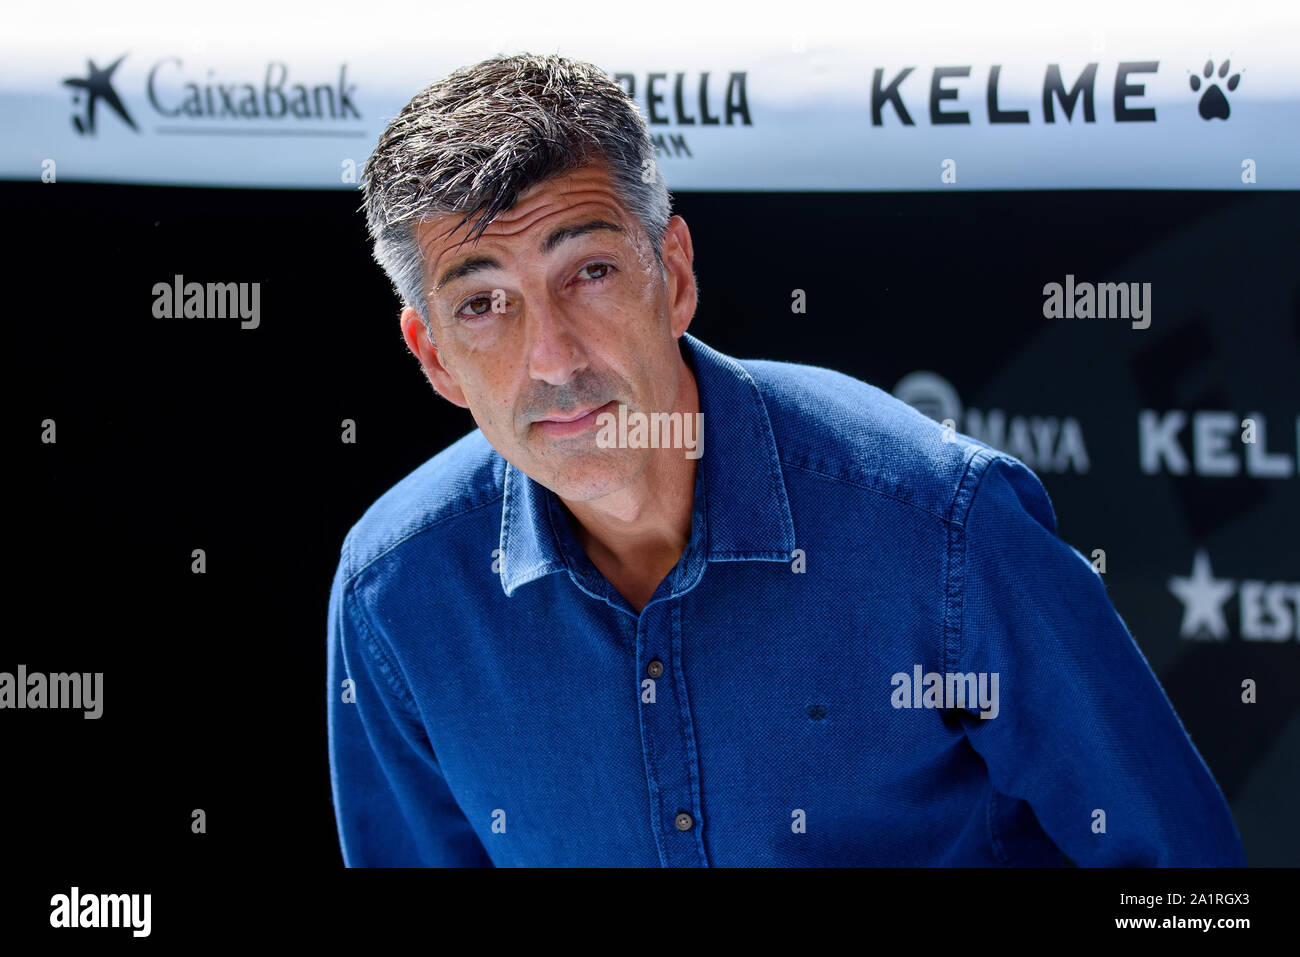 BARCELONA - SEP 22: The coach Imanol Alguacil at the La Liga match between RCD Espanyol and Real Sociedad at the RCDE Stadium on September 22, 2019 in Stock Photo